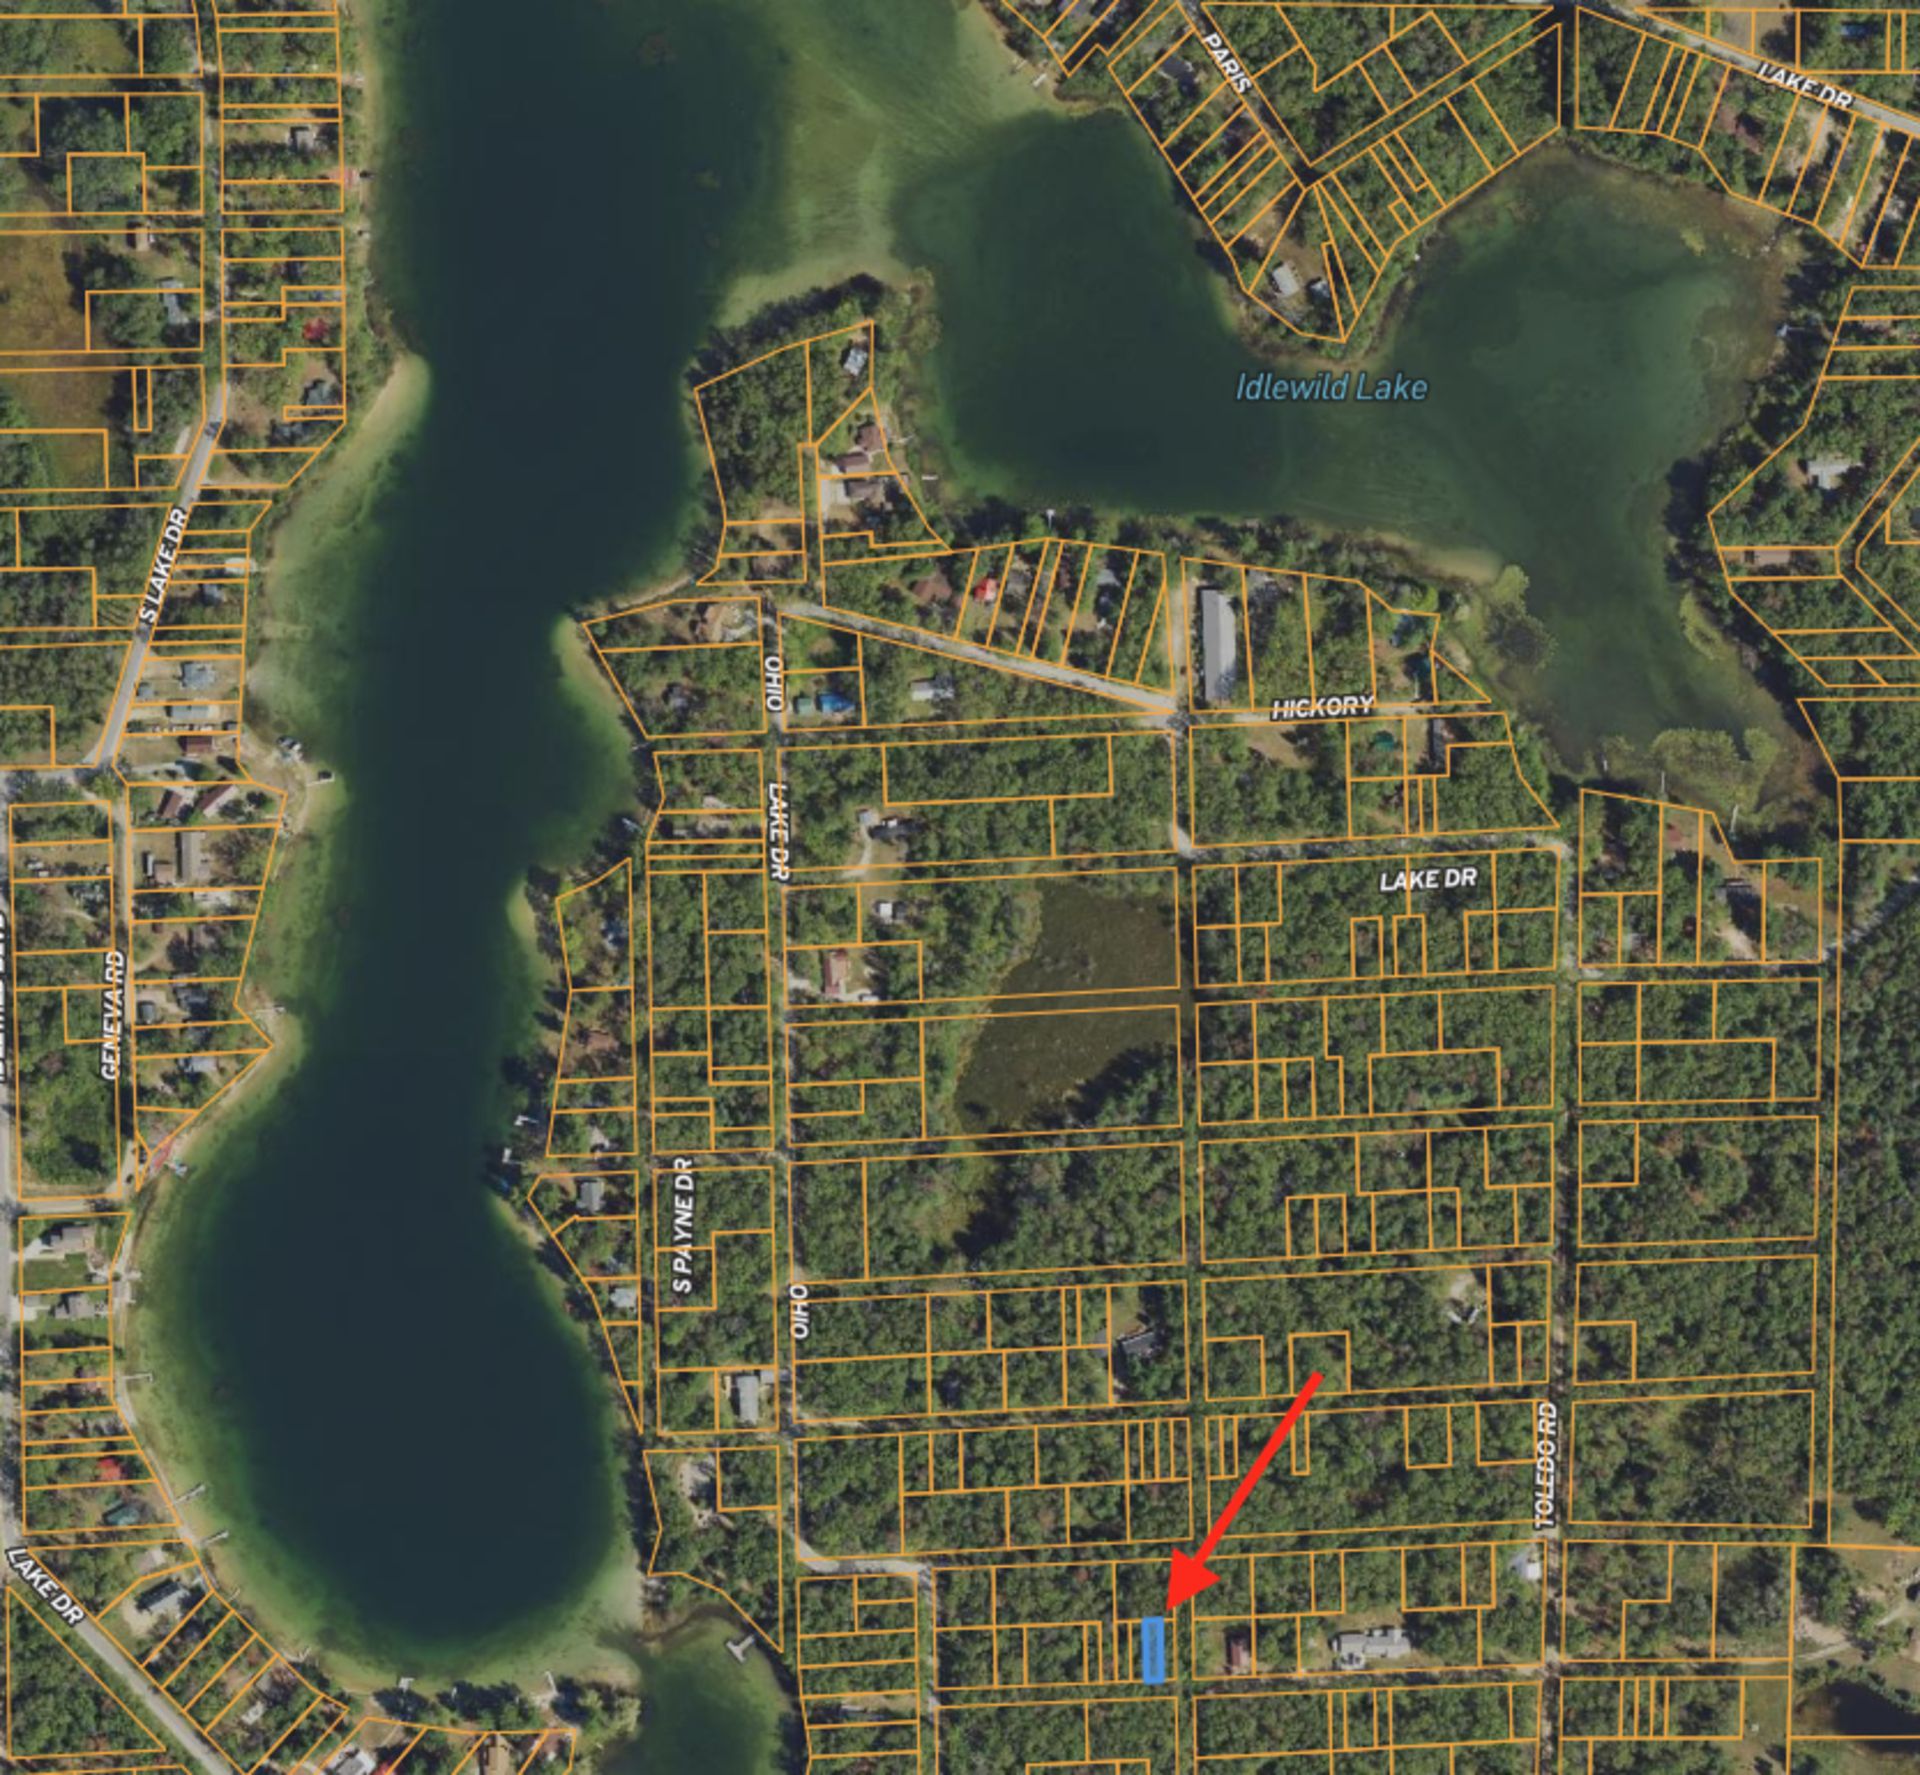 Own Land in Lake County, Michigan - the "Home of Over 100 Lakes"! - Image 9 of 13